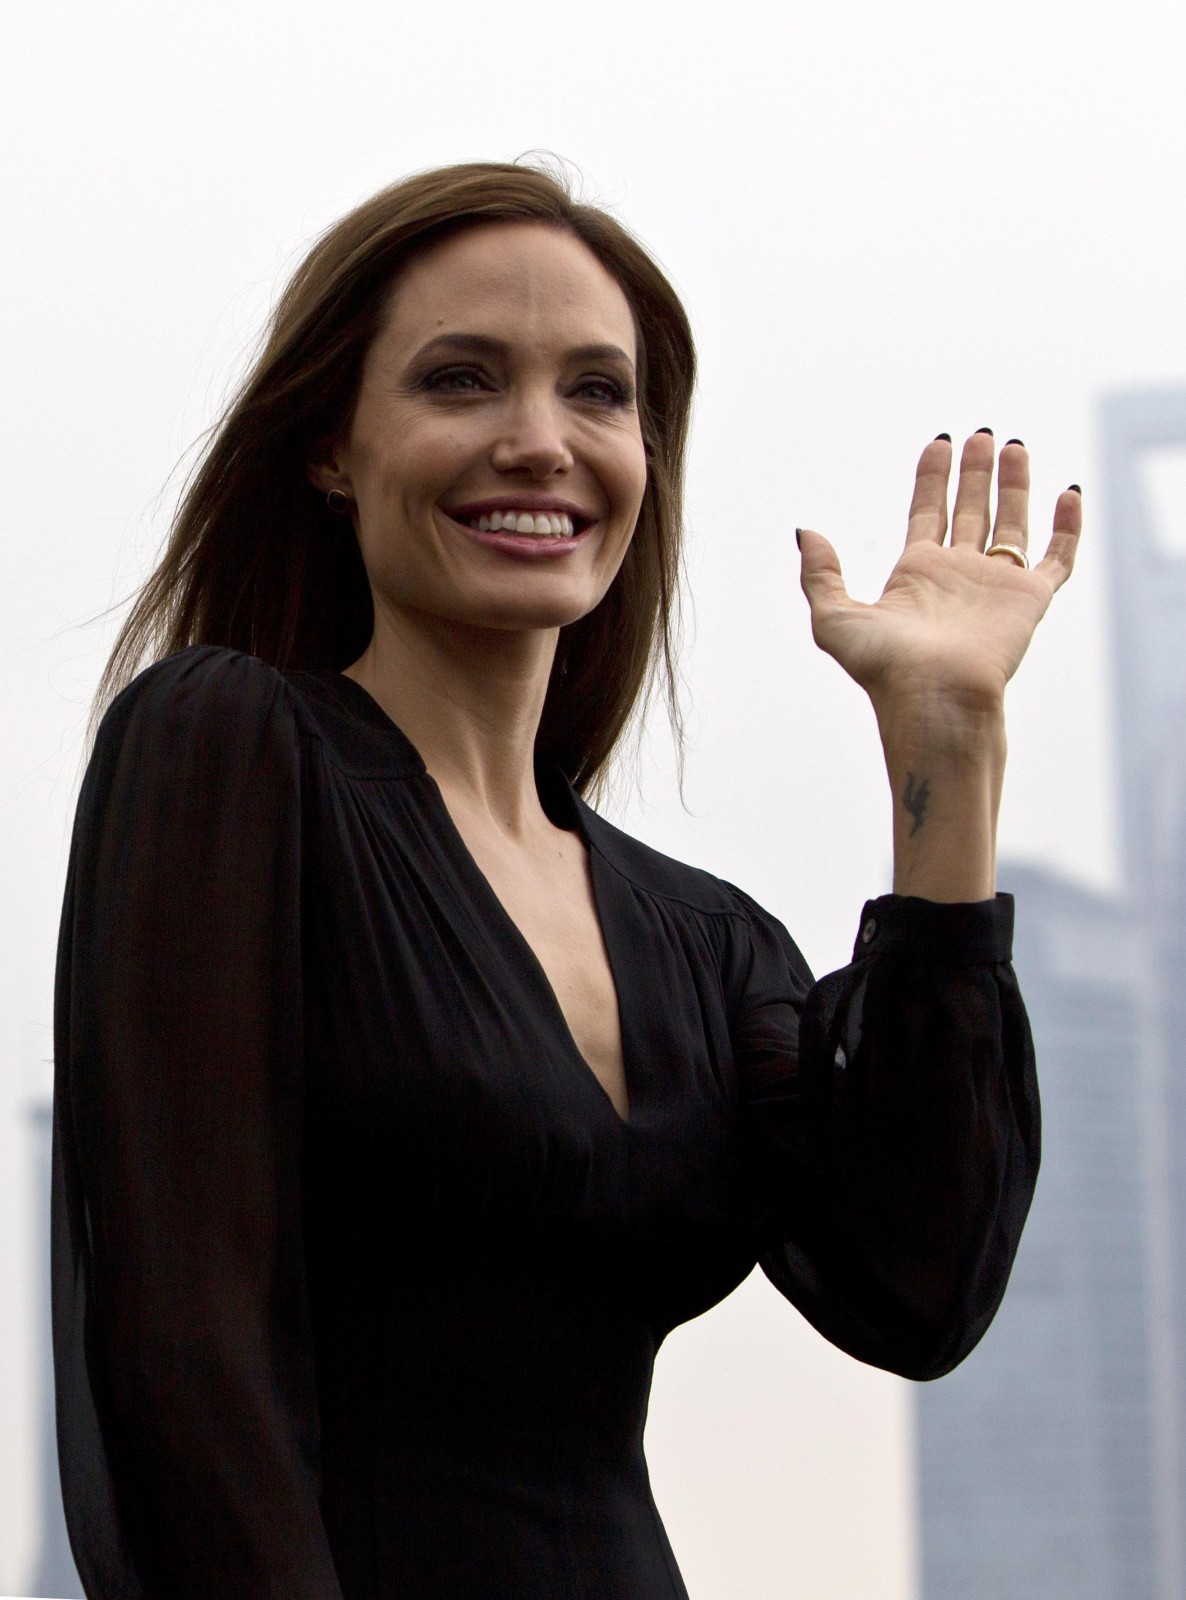 As I will find even better pictures, I will keep adding them.
#Angelina #ANegative #NegativeLeftie